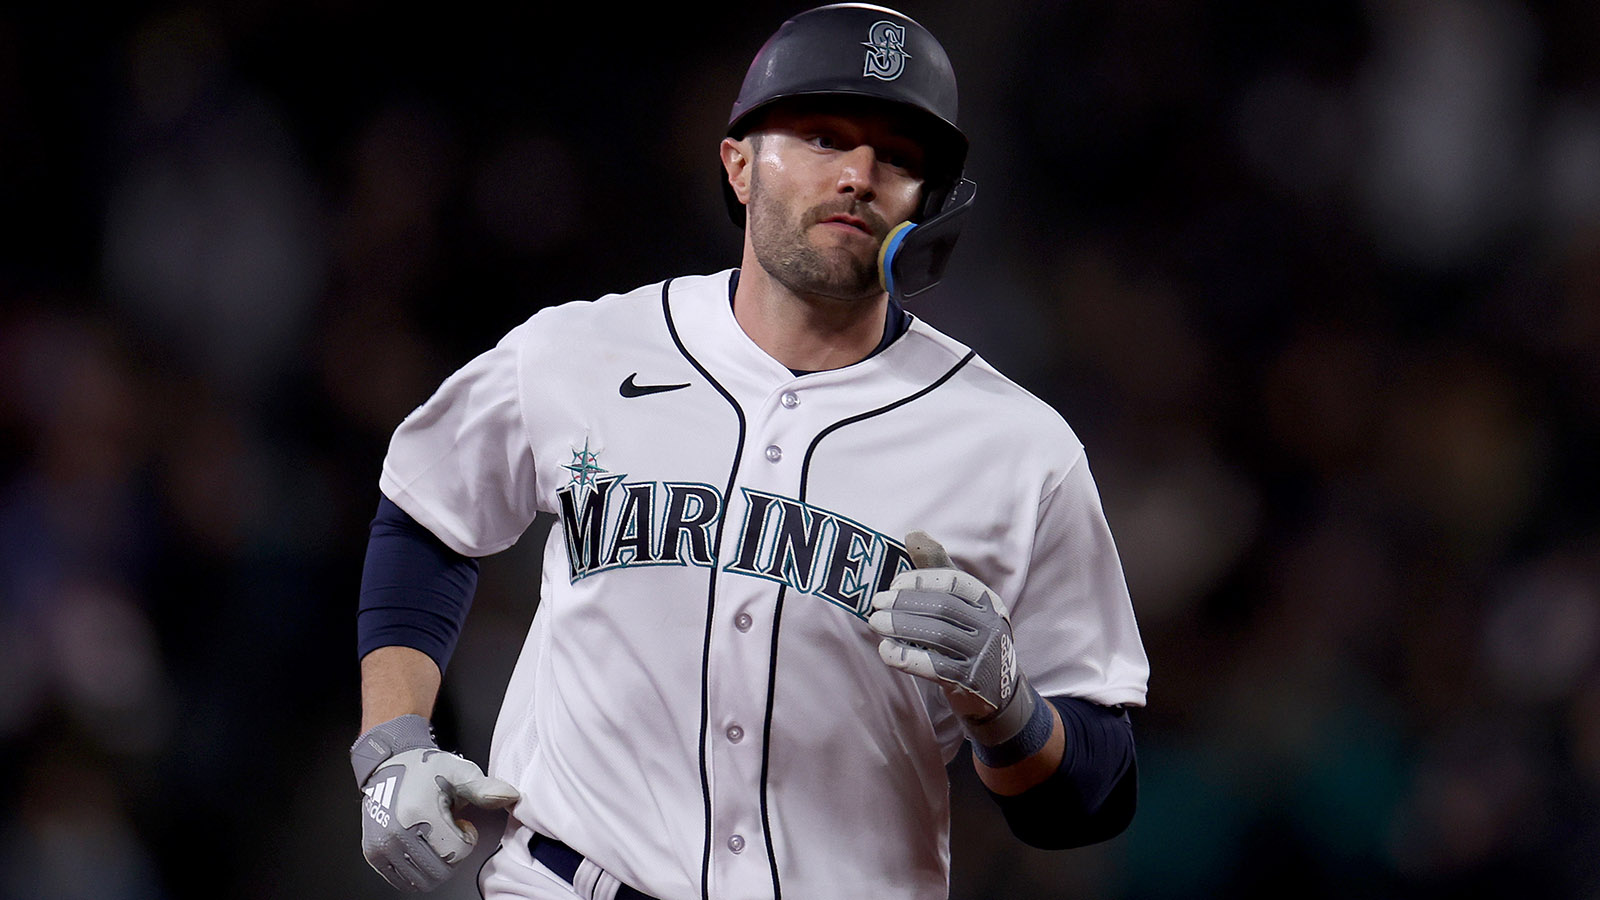 The Giants are acquiring outfielder A.J. Pollock and utilityman